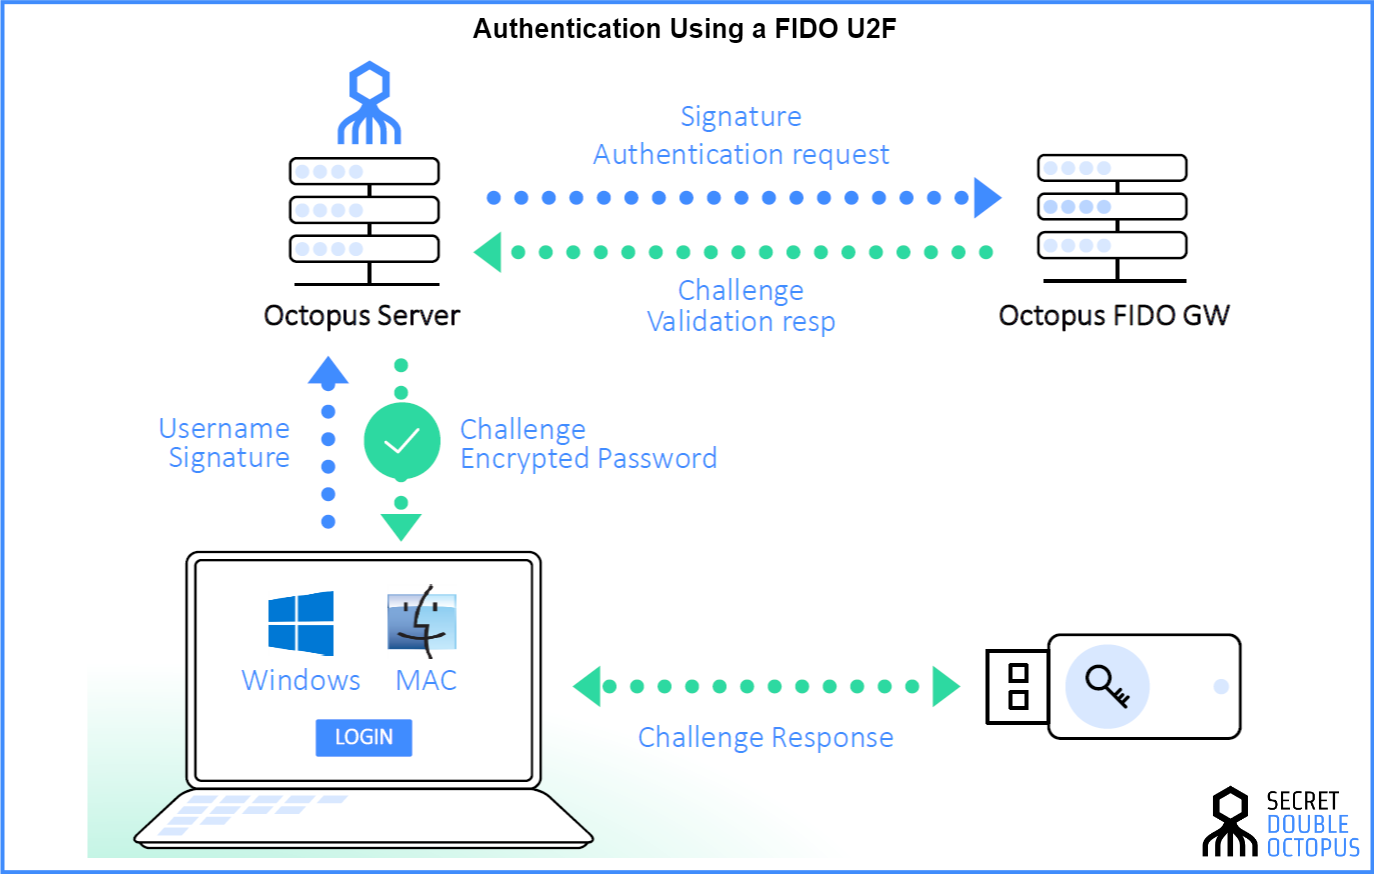 Fending off Phishing: How to Enhance Authentication as Bad Guys Get Better  - FIDO Alliance